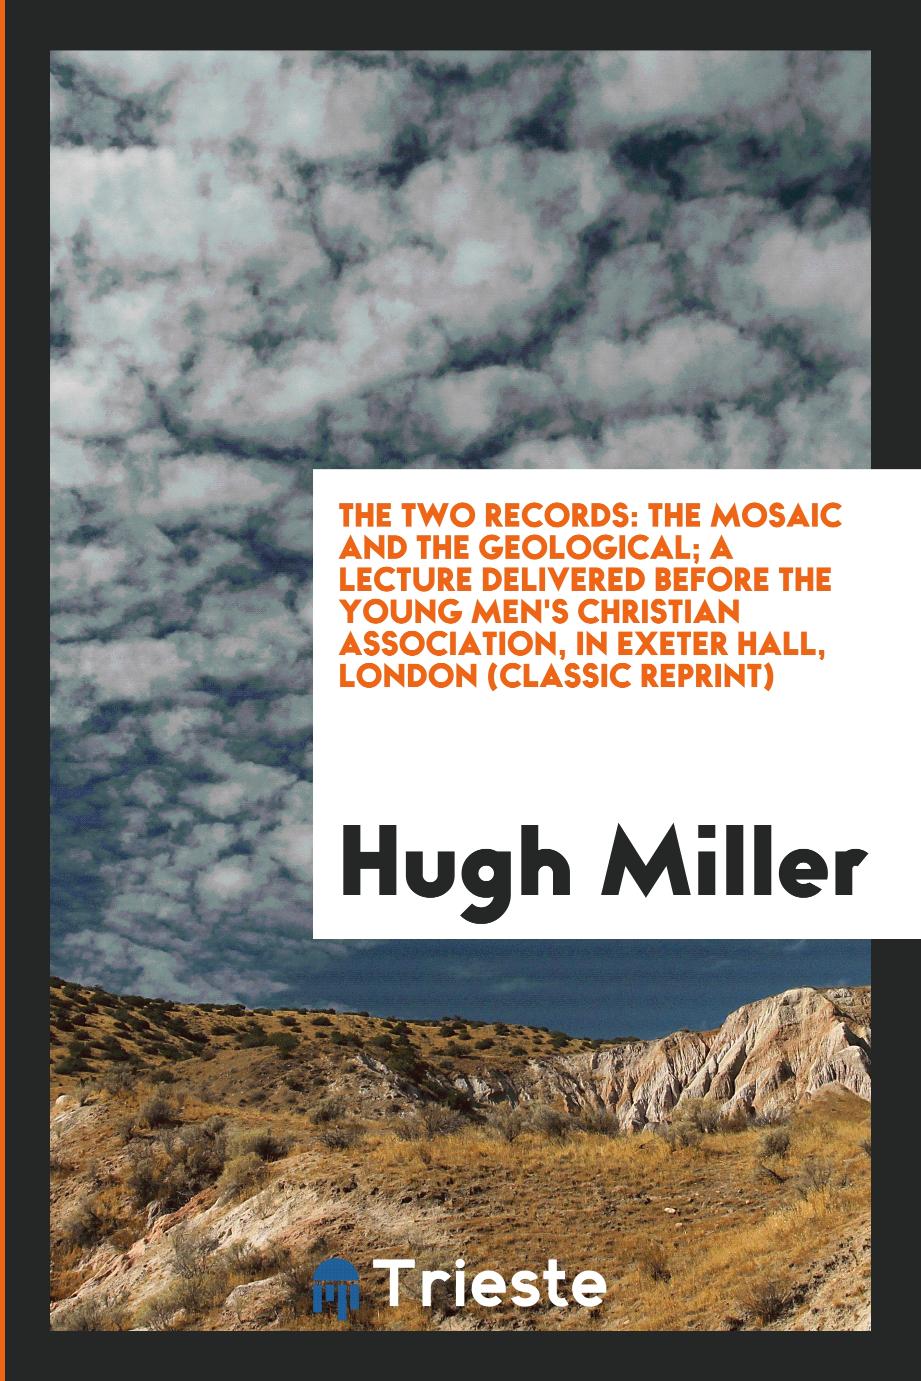 The Two Records: The Mosaic and the Geological; A Lecture Delivered Before the Young Men's Christian Association, in Exeter Hall, London (Classic Reprint)